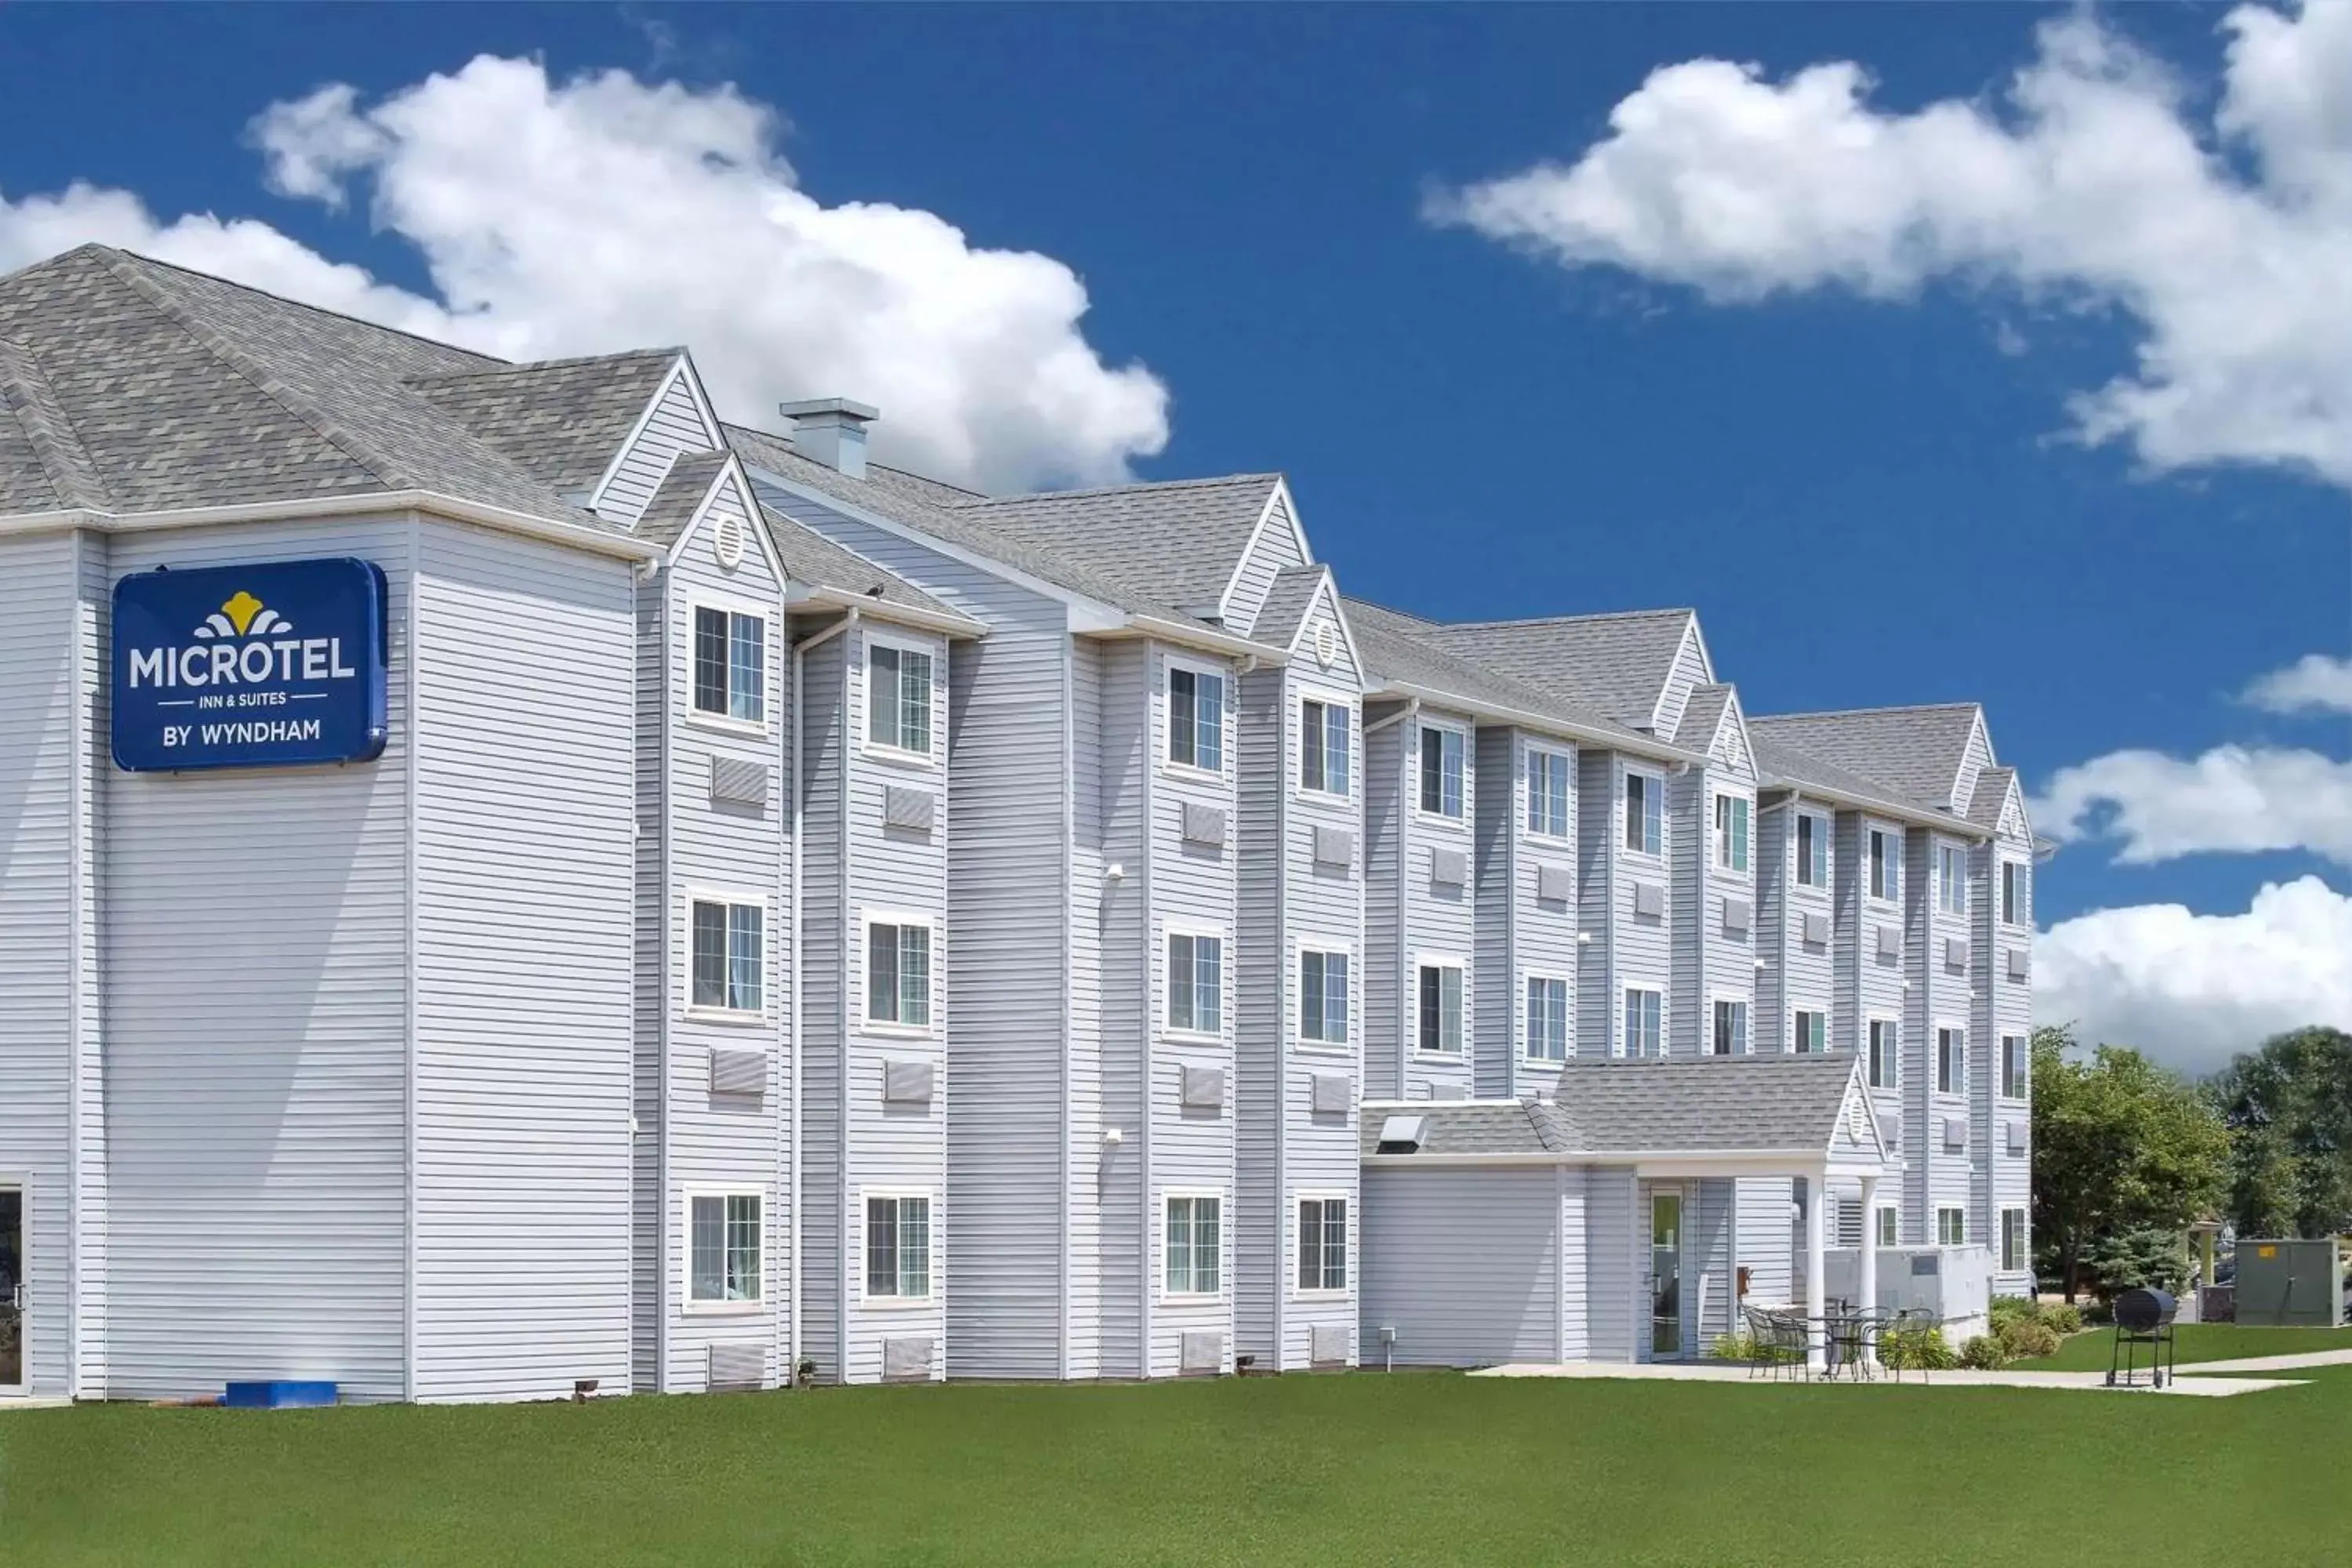 Property Building in MICROTEL Inn and Suites - Ames